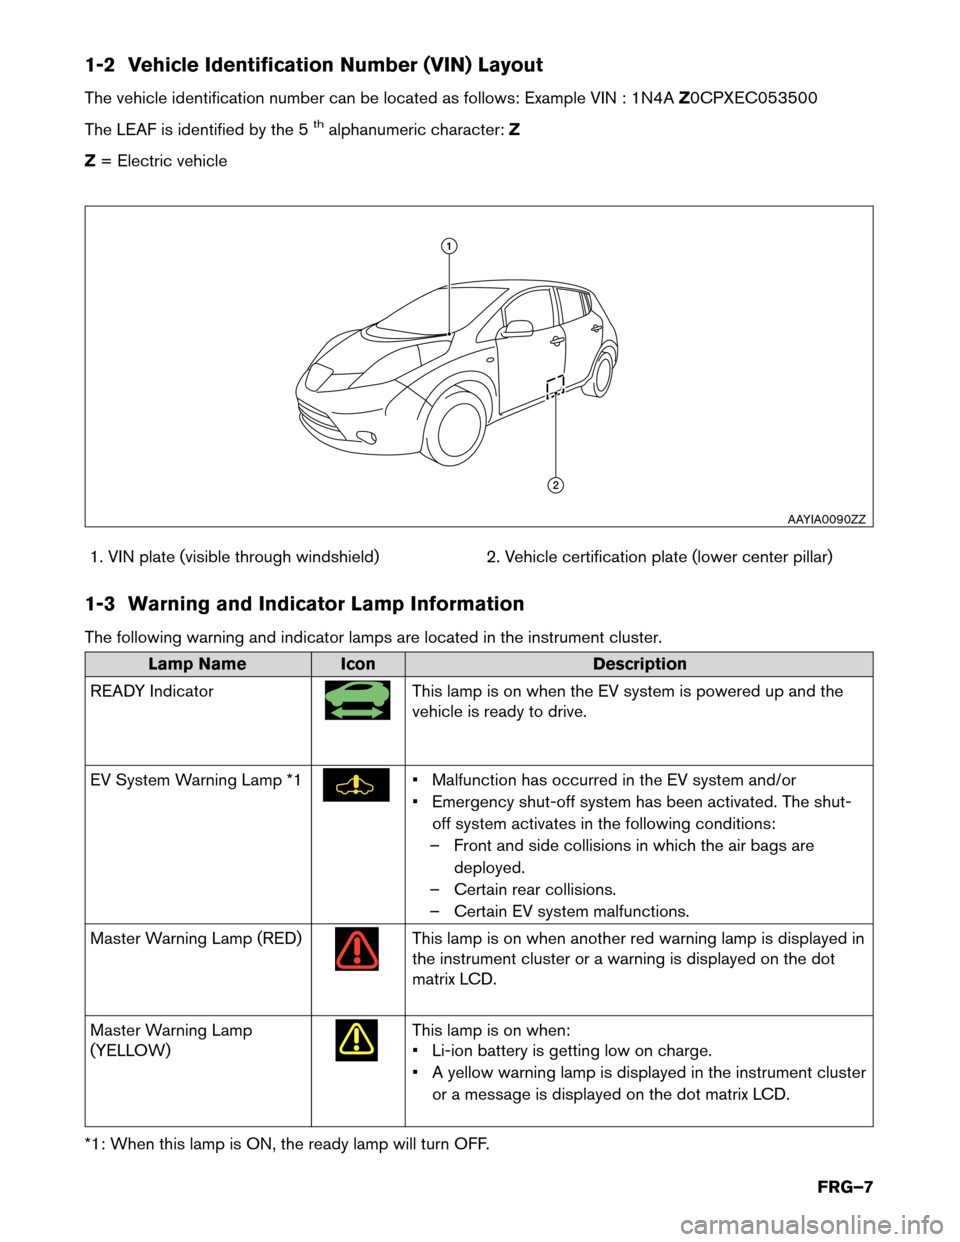 NISSAN LEAF 2014 1.G First Responders Guide 1-2 Vehicle Identification Number (VIN) Layout
The
vehicle identification number can be located as follows: Example VIN : 1N4A Z0CPXEC053500
The LEAF is identified by the 5
thalphanumeric character: Z